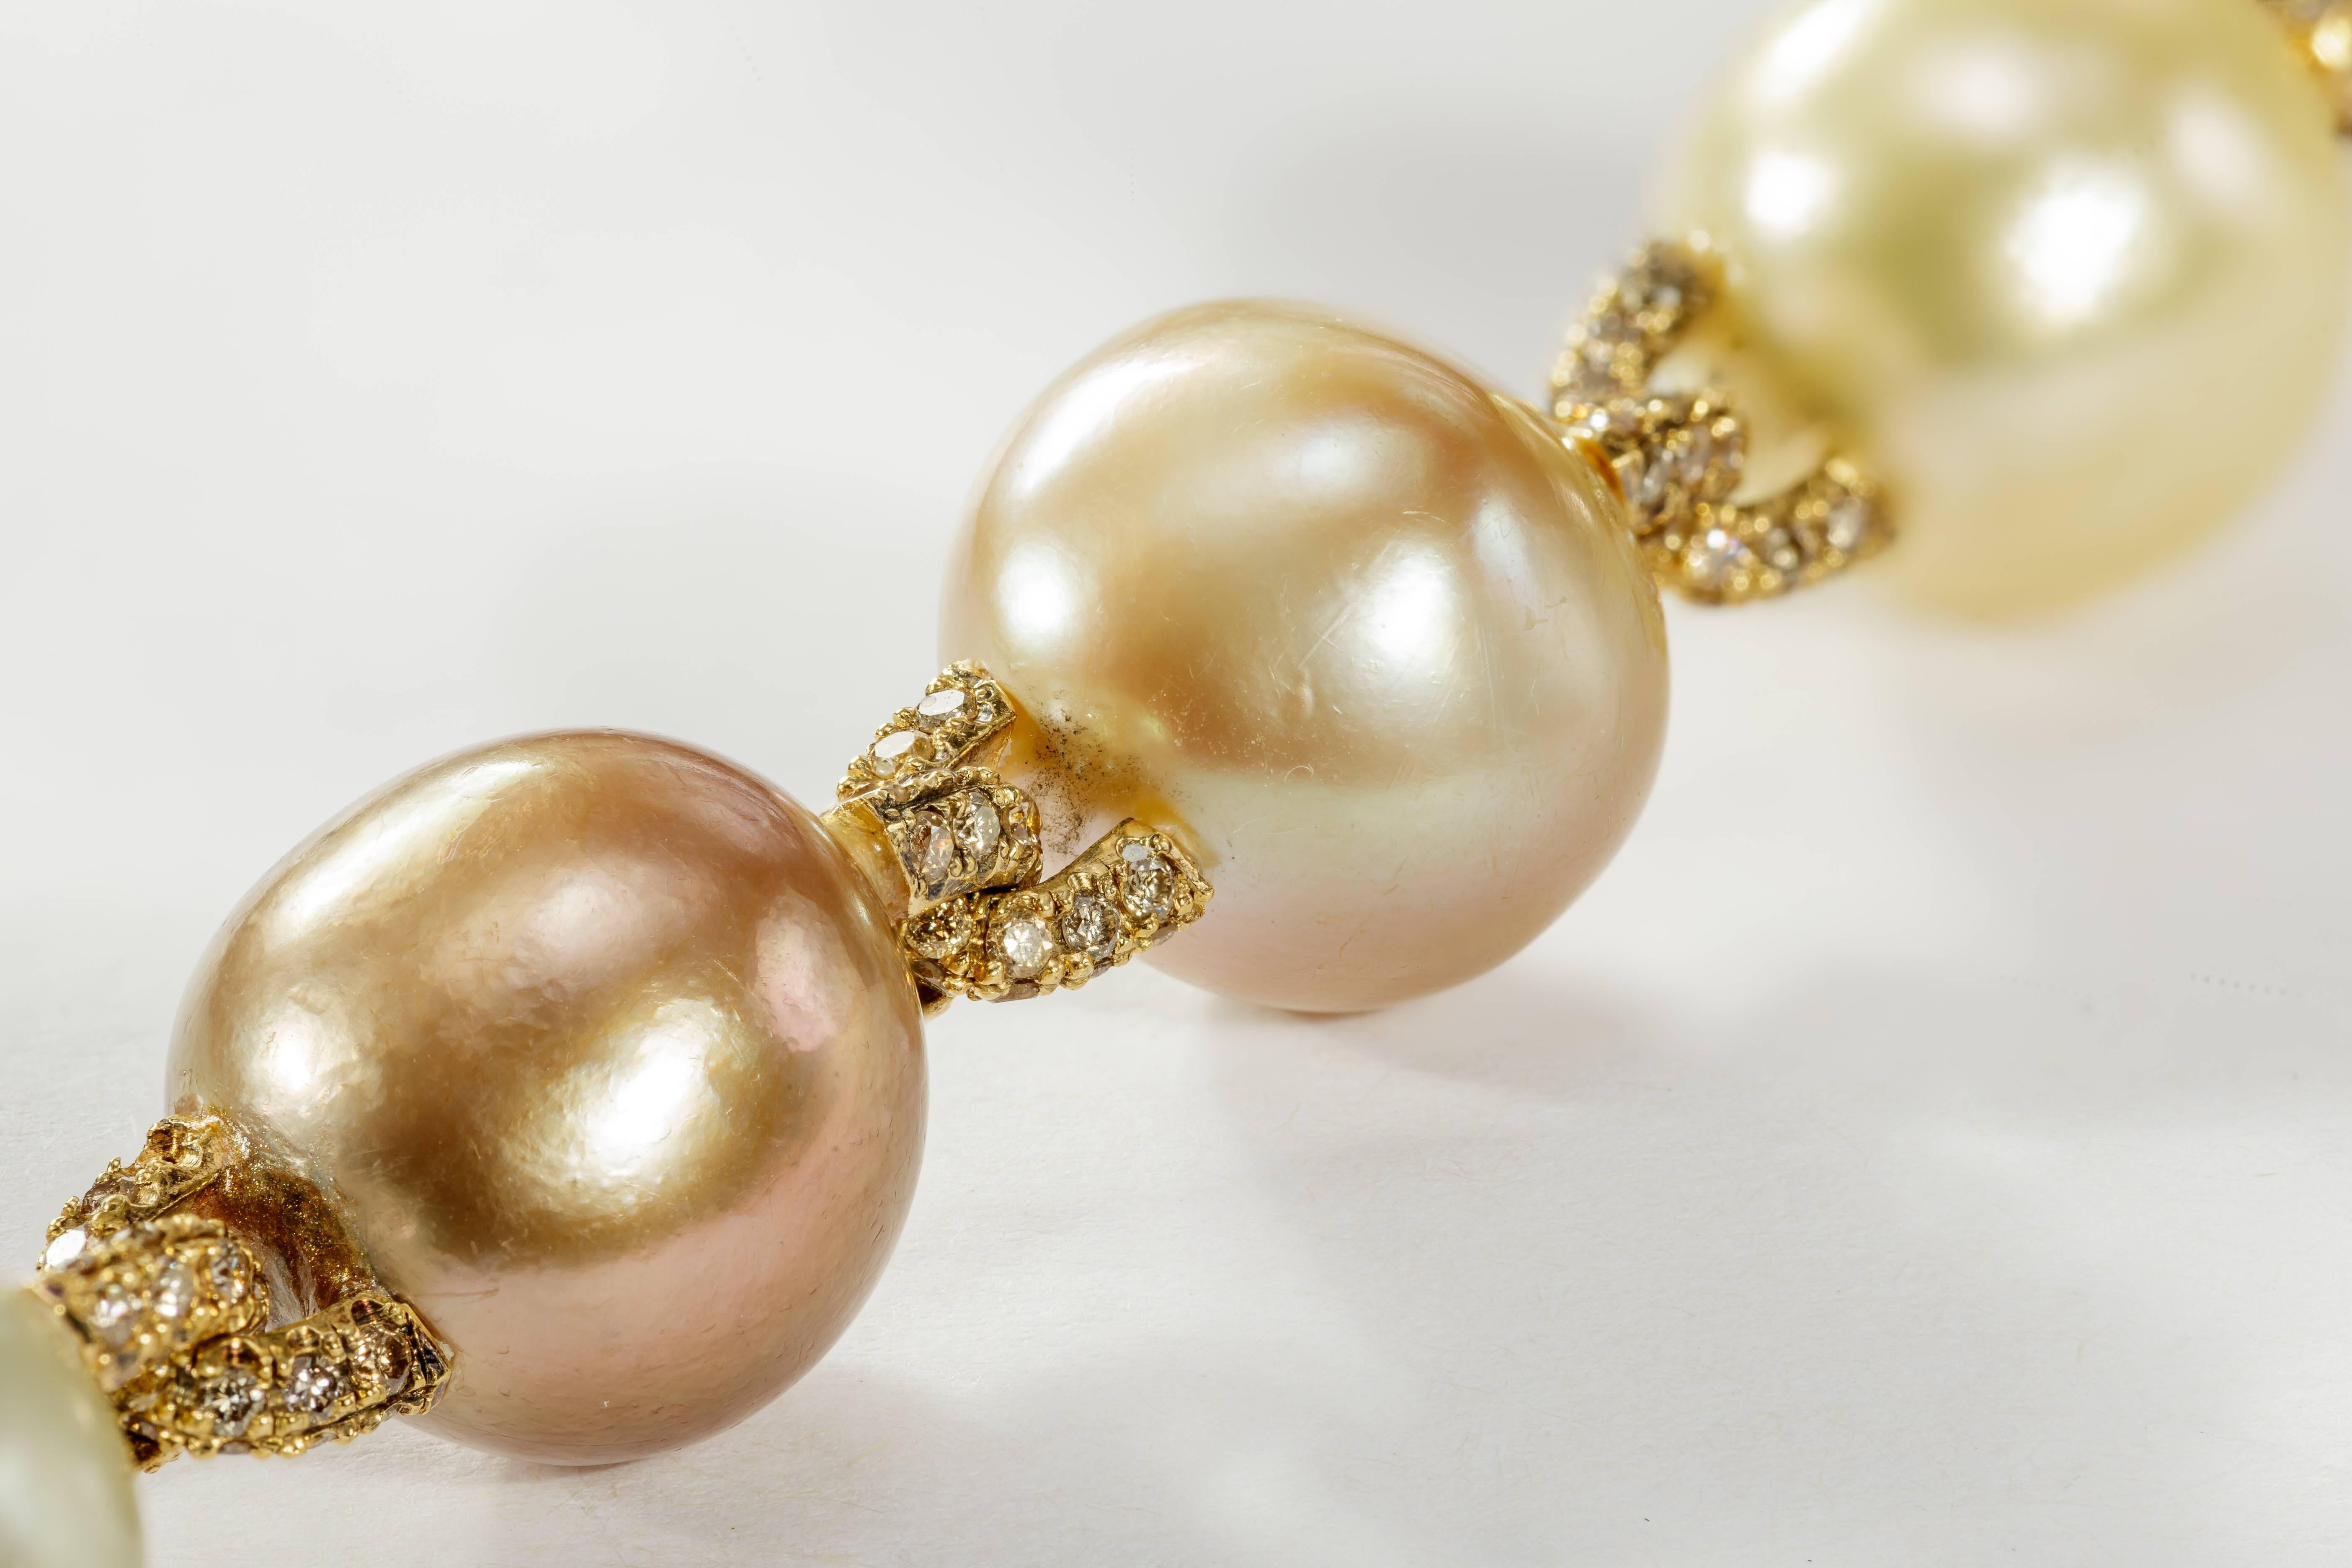 This Yvel bracelet features 10 multicolored baroque pearls linked by 18k yellow gold.  The yellow gold links are set with diamonds totaling 3.24ct.  It measures 8 inches long.